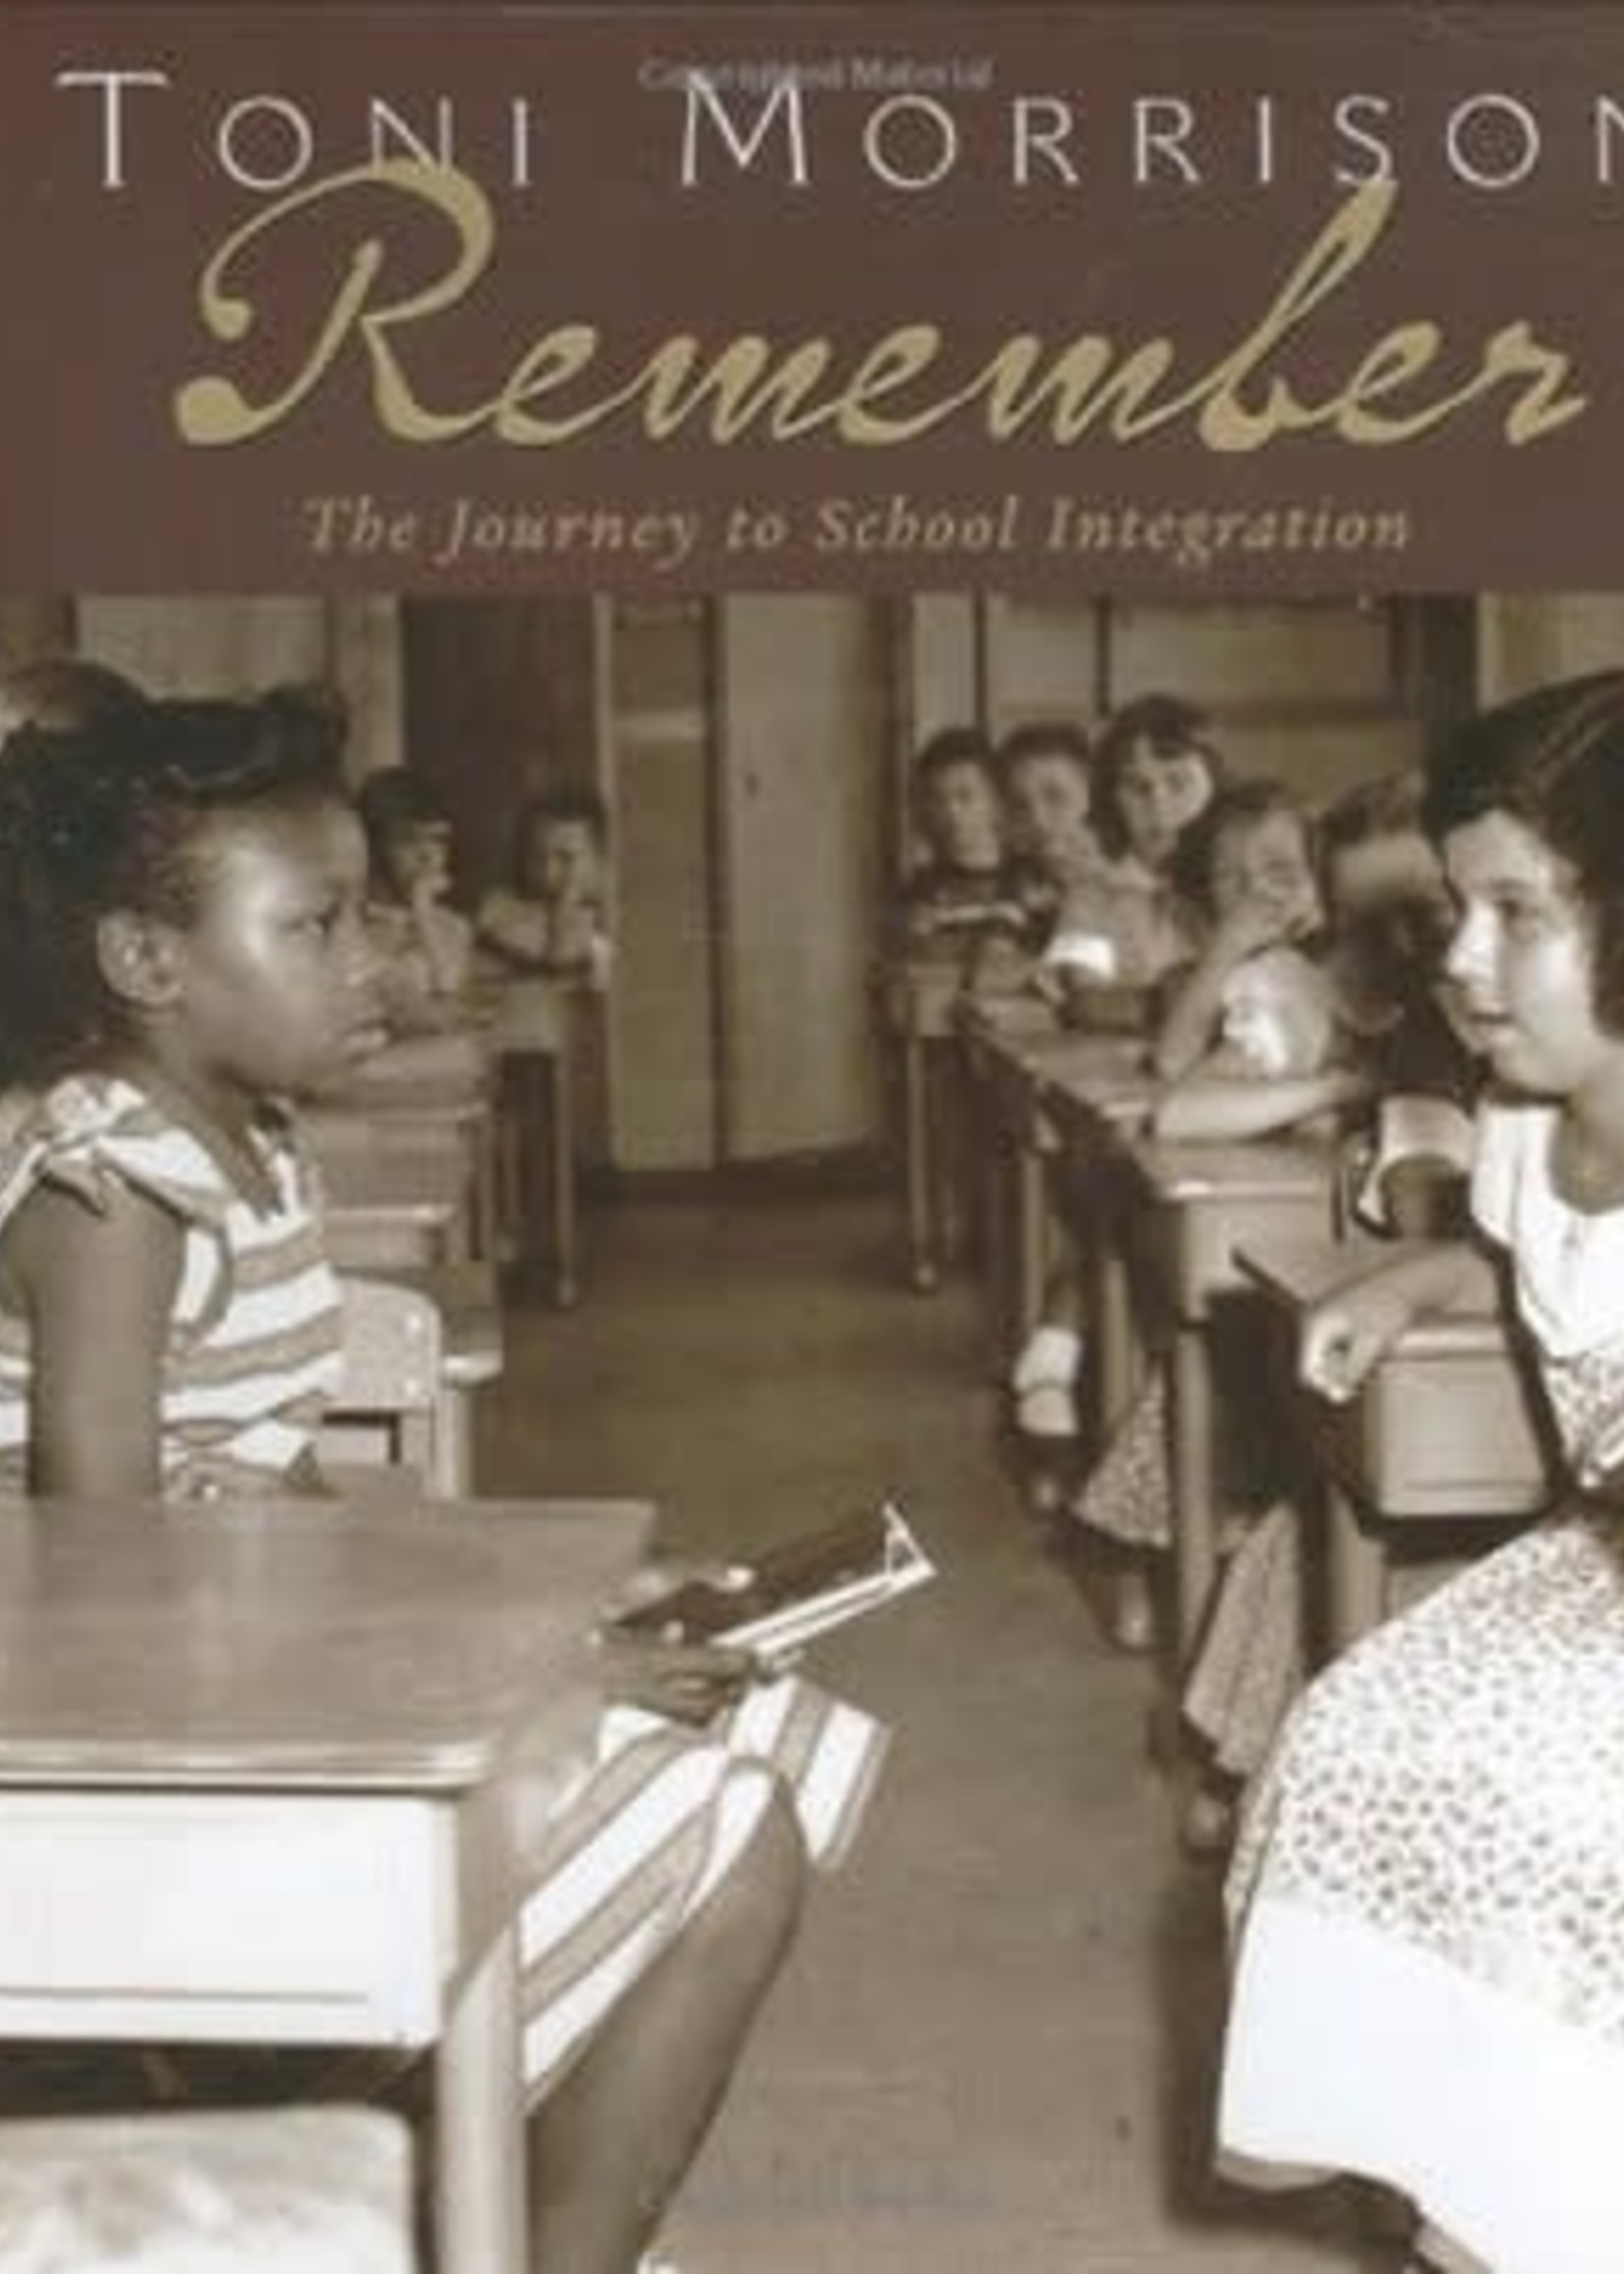 Remember: The Journey to School Integration by Toni Morrison